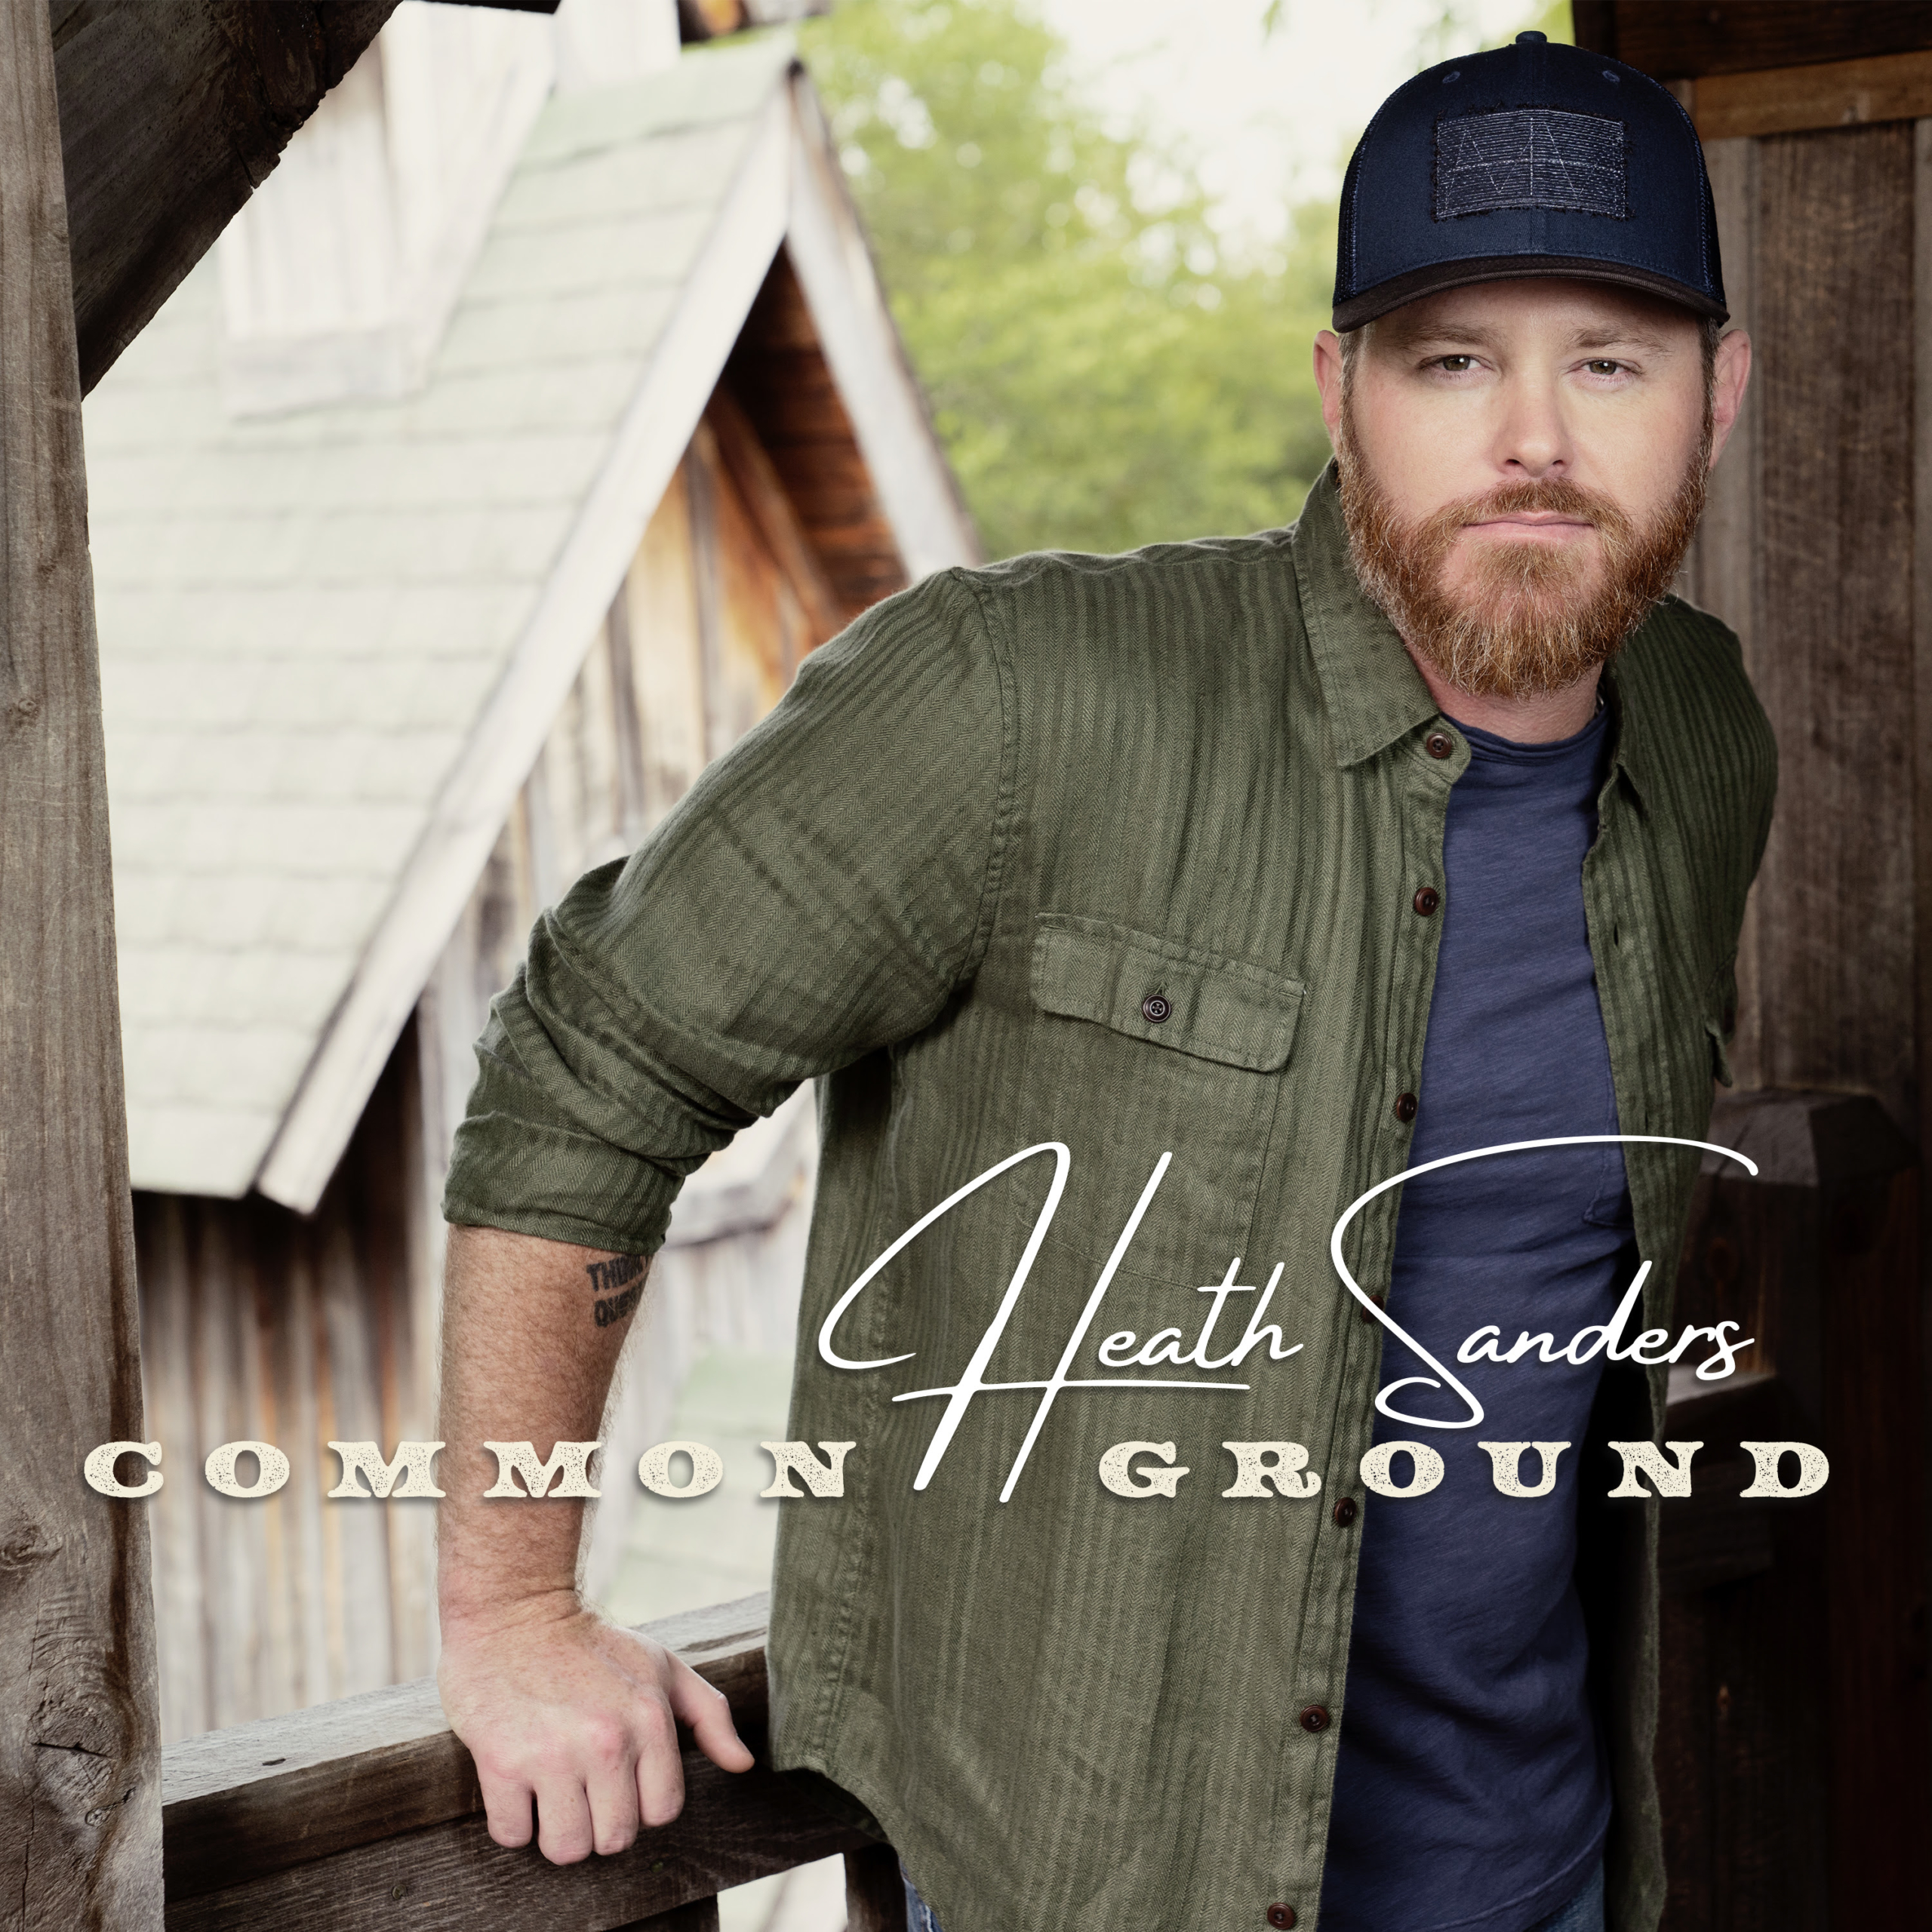 Heath Sanders’ Debut EP 'Common Ground' is out now, January 29th